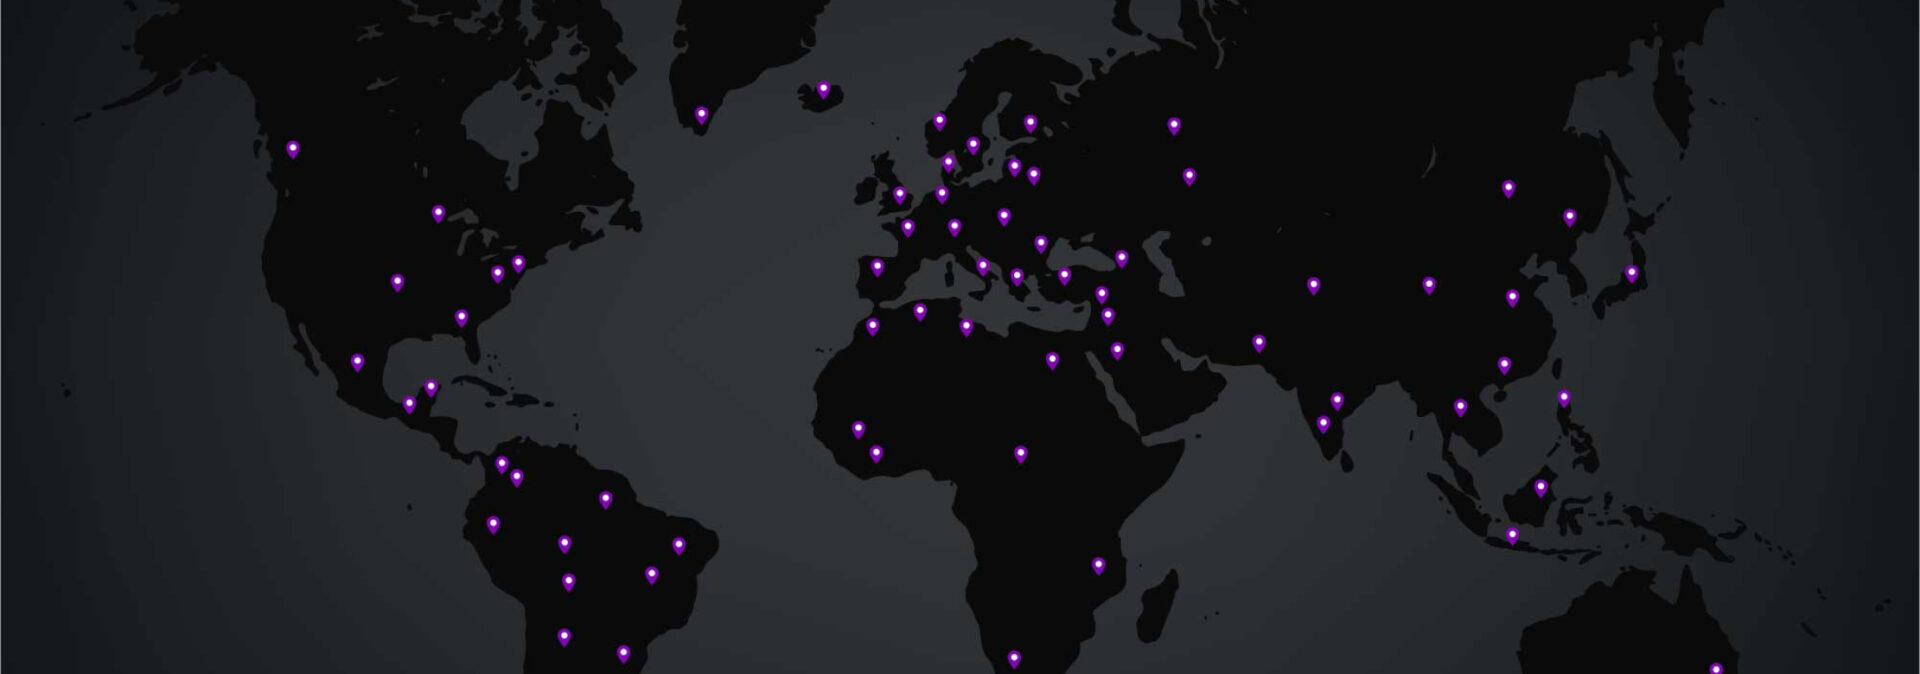 A map of the world on which Kramer's global presence is marked in purple dots